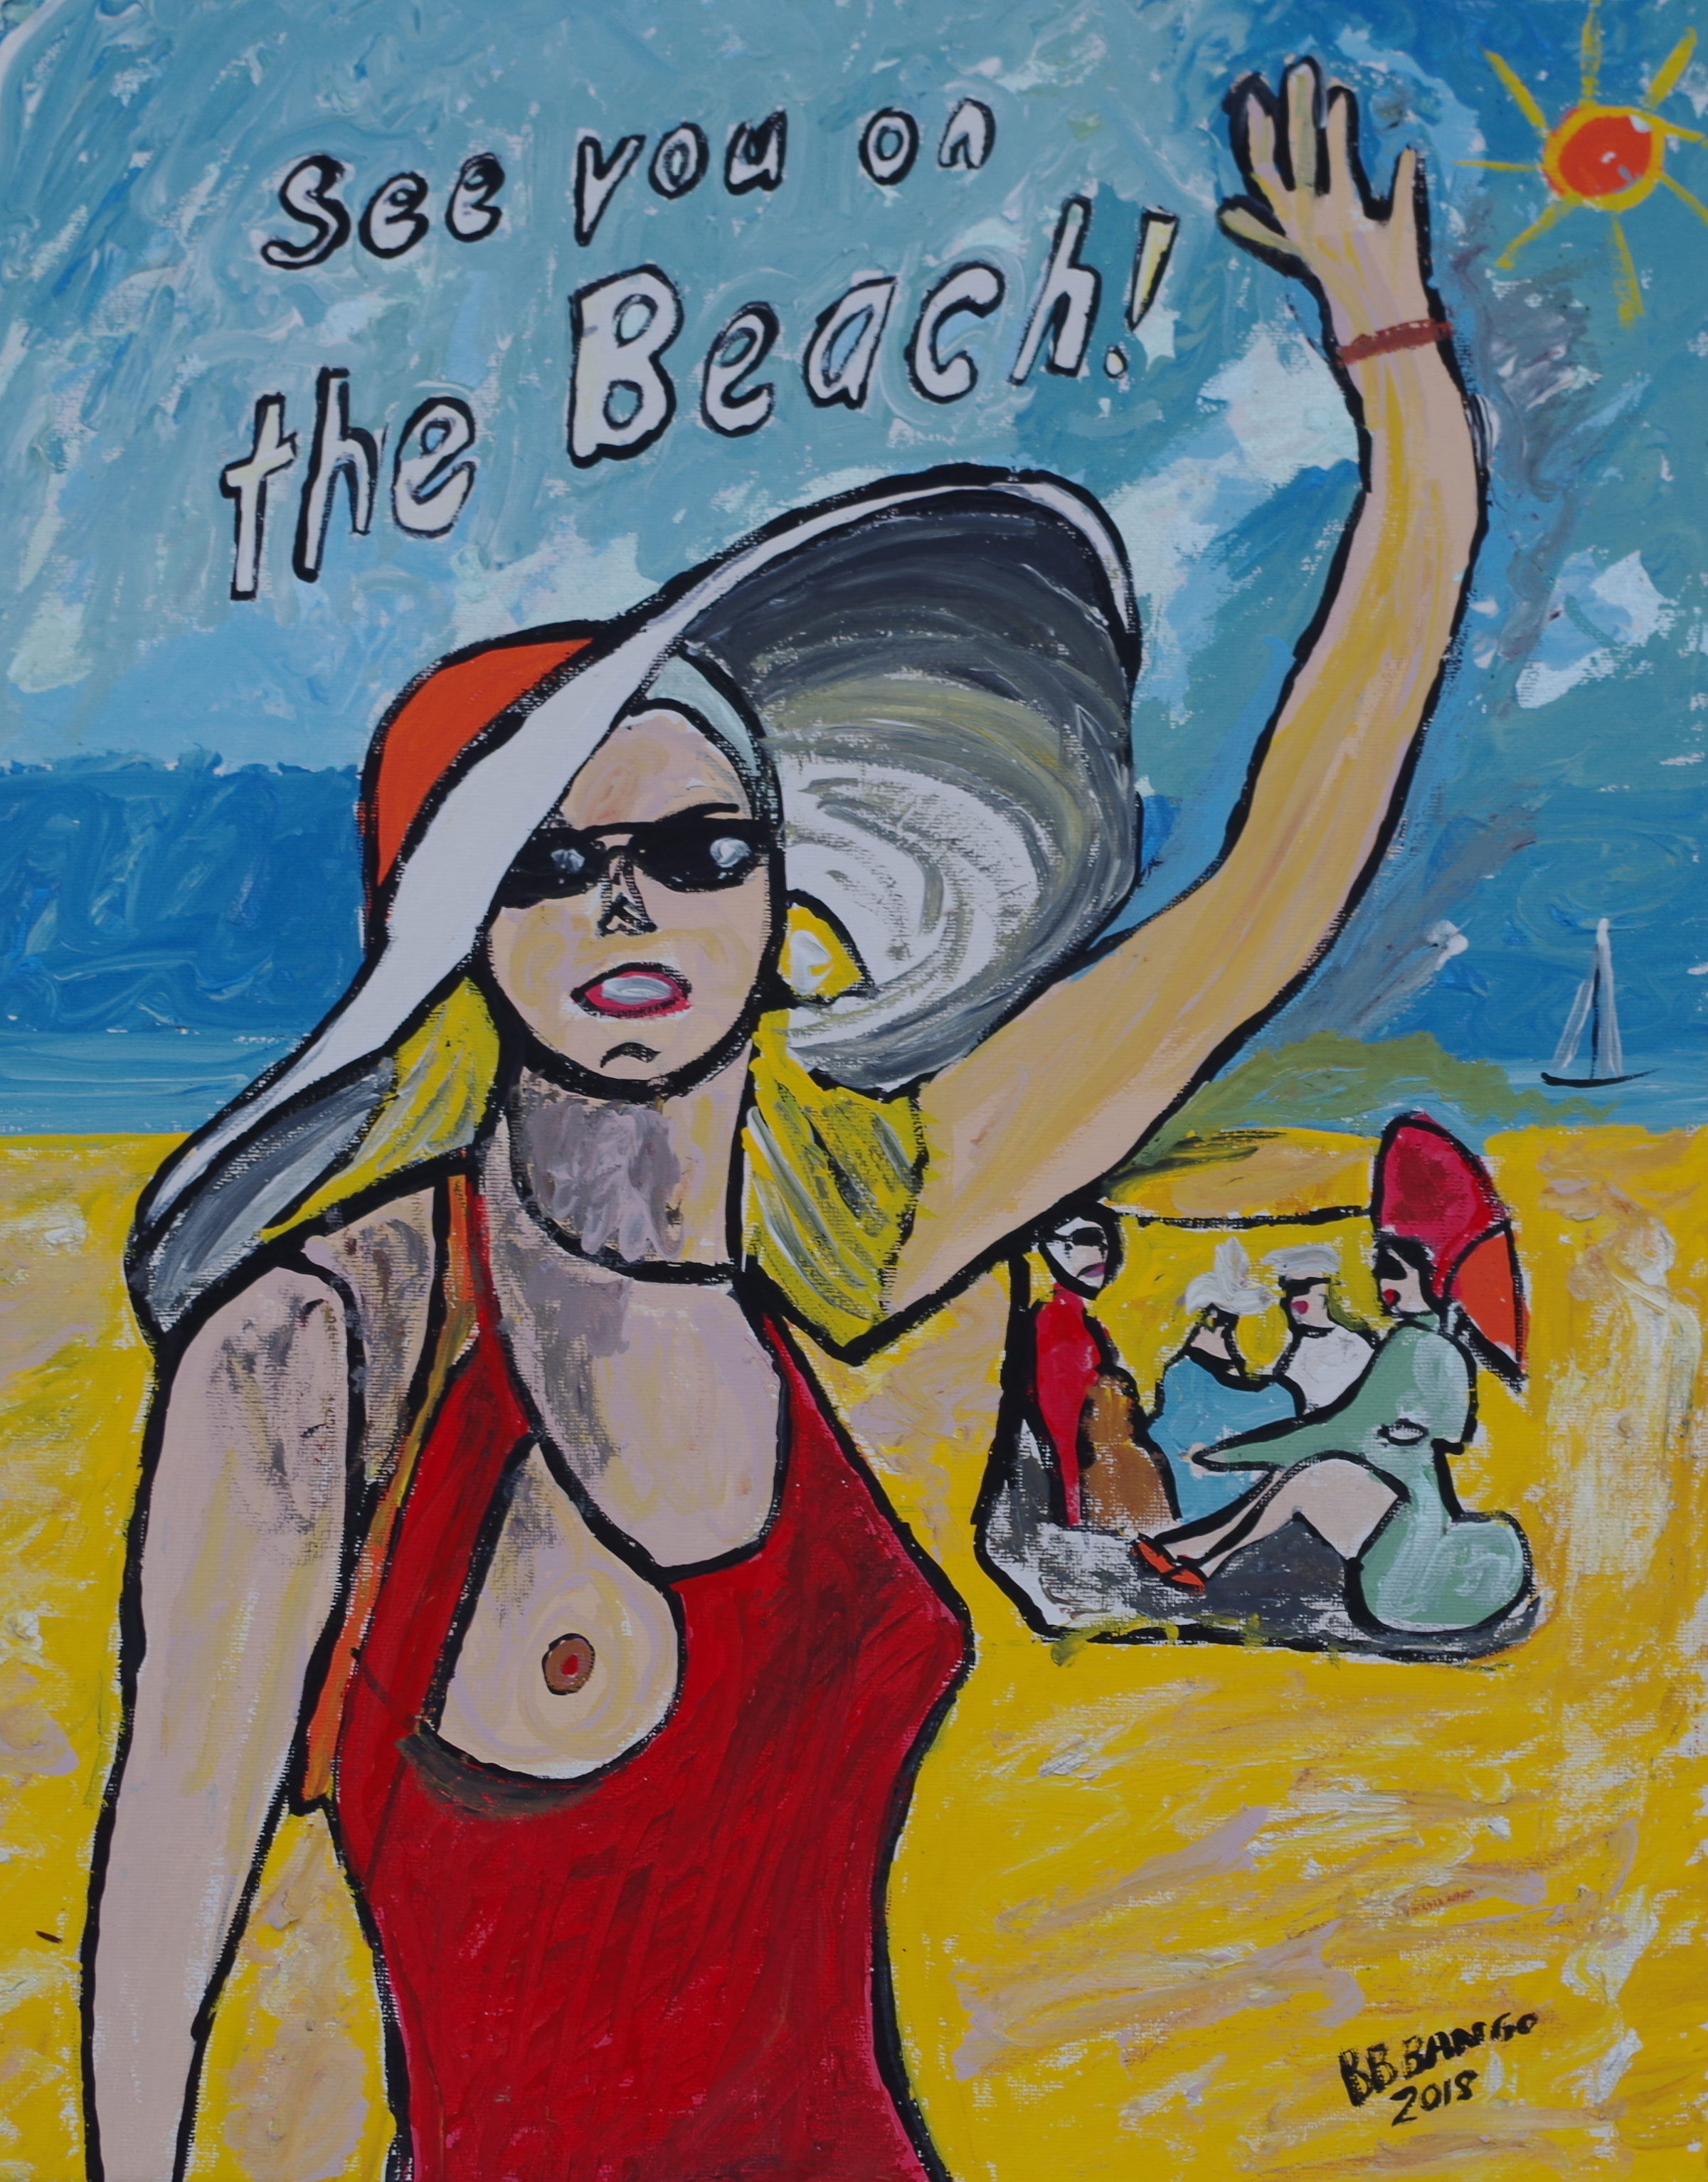 'Come to the Beach' by BB Bango based 20 by 16 inch acrylic on canvas. Sold to art collector in UK